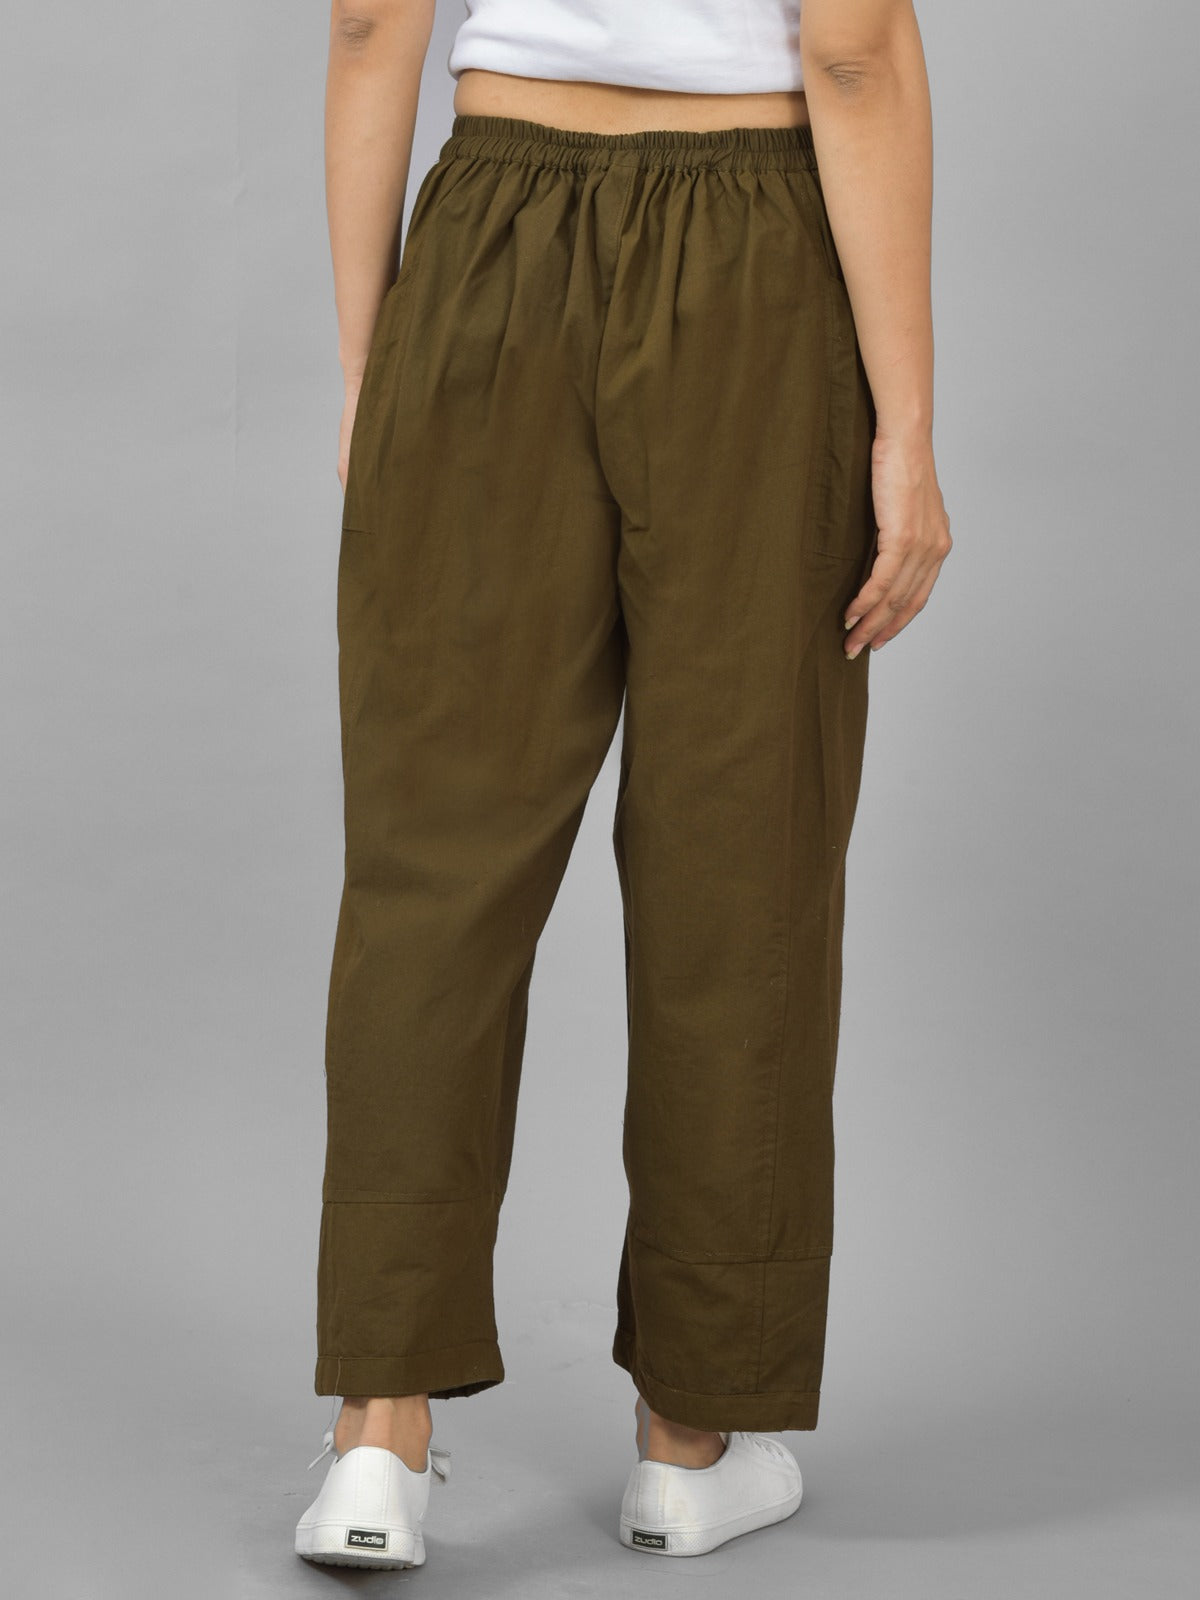 Combo Pack Of Womens White And Mehendi Green Side Pocket Straight Cargo Pants